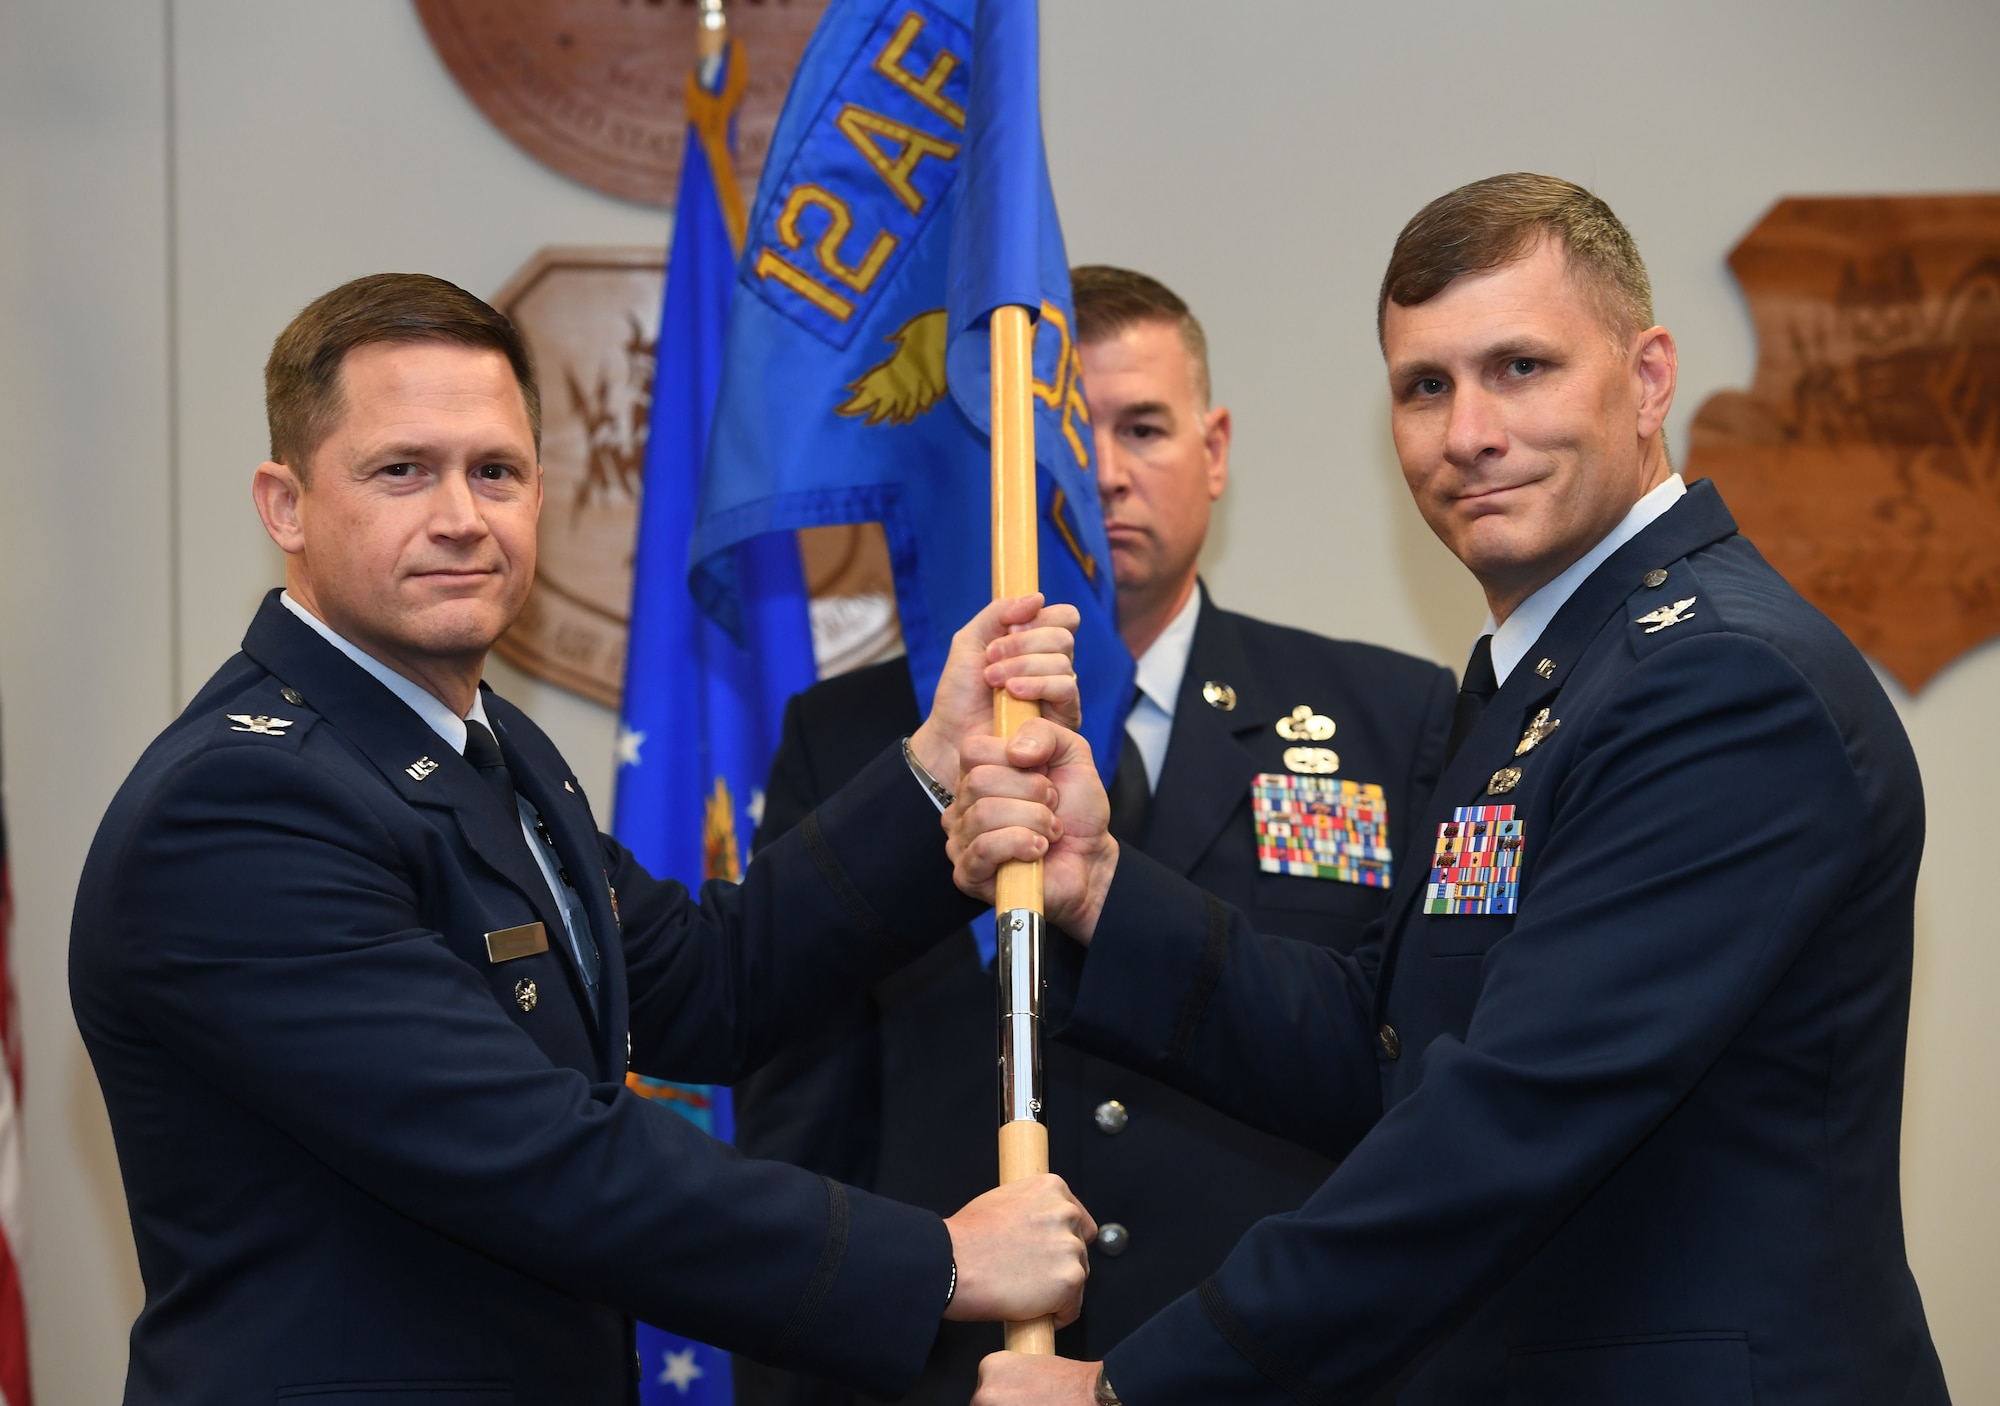 The PAROC assumes responsibility of synchronizing, managing, and implementing flying, maintenance, and communications operations across 16 active duty and Air National Guard bases in the continental United States.